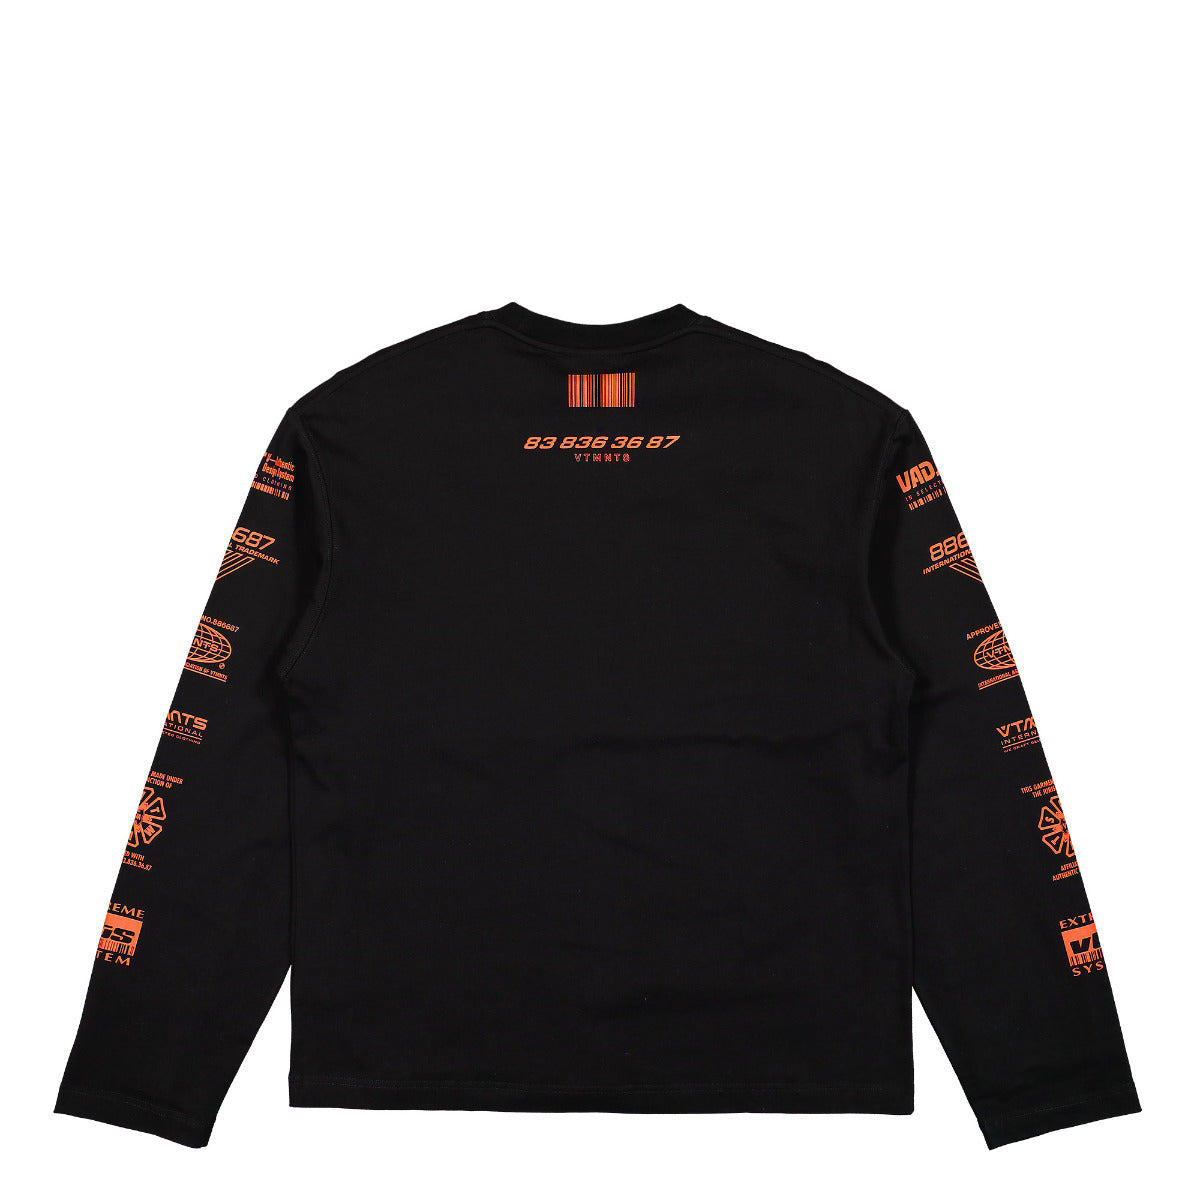 All Rights Reserved Longsleeve | GATE